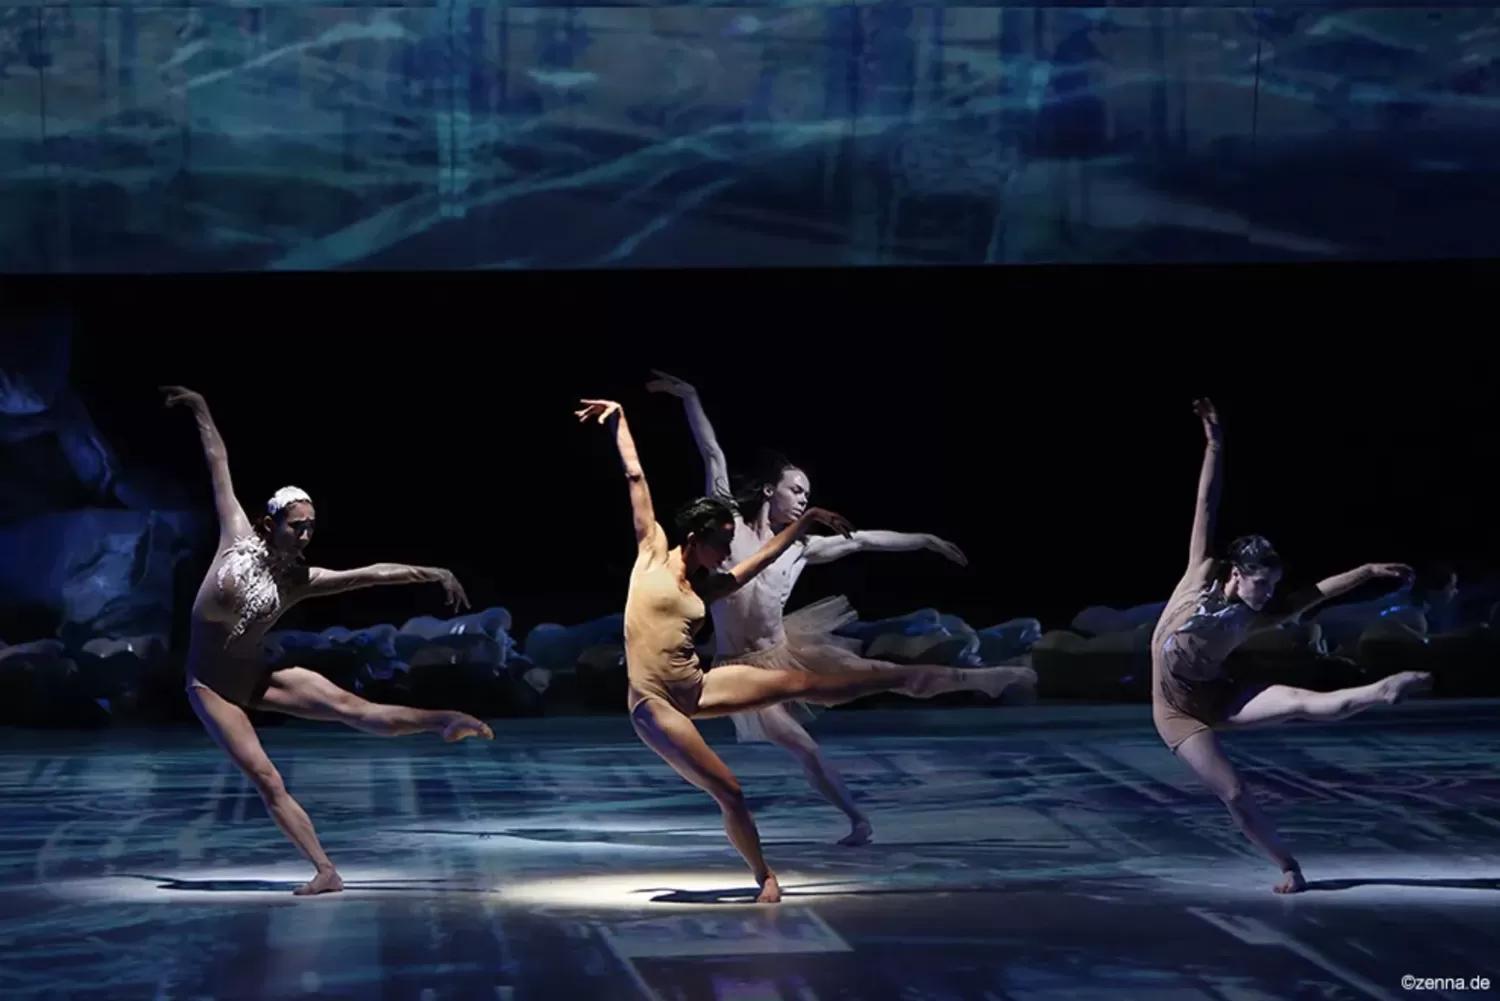 How can AI be utilized to standardize ballet teaching?